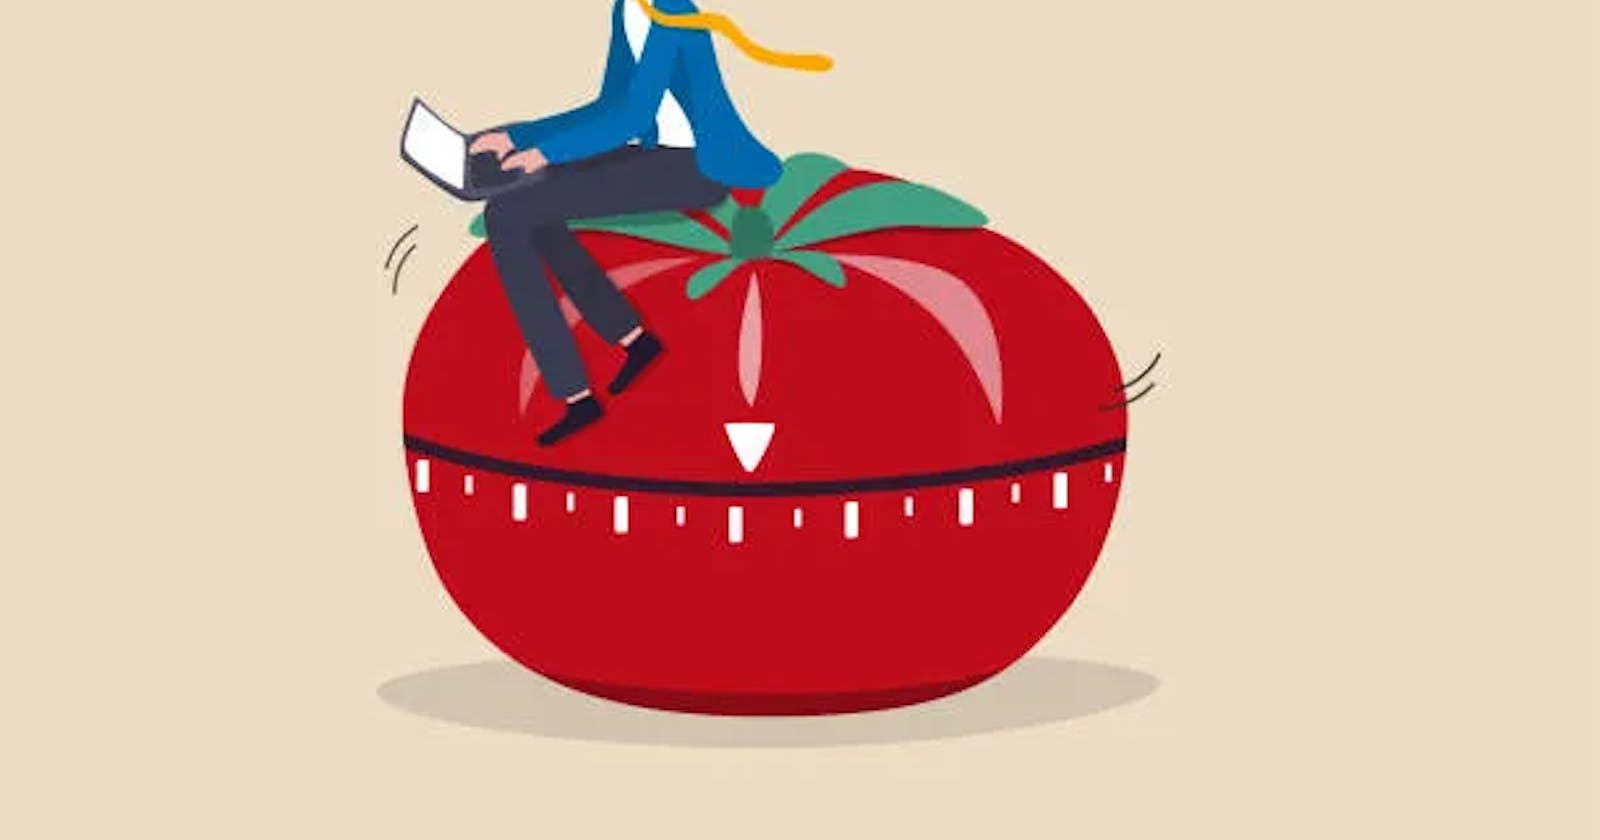 The Pomodoro Technique: Time Management with Tomatoes